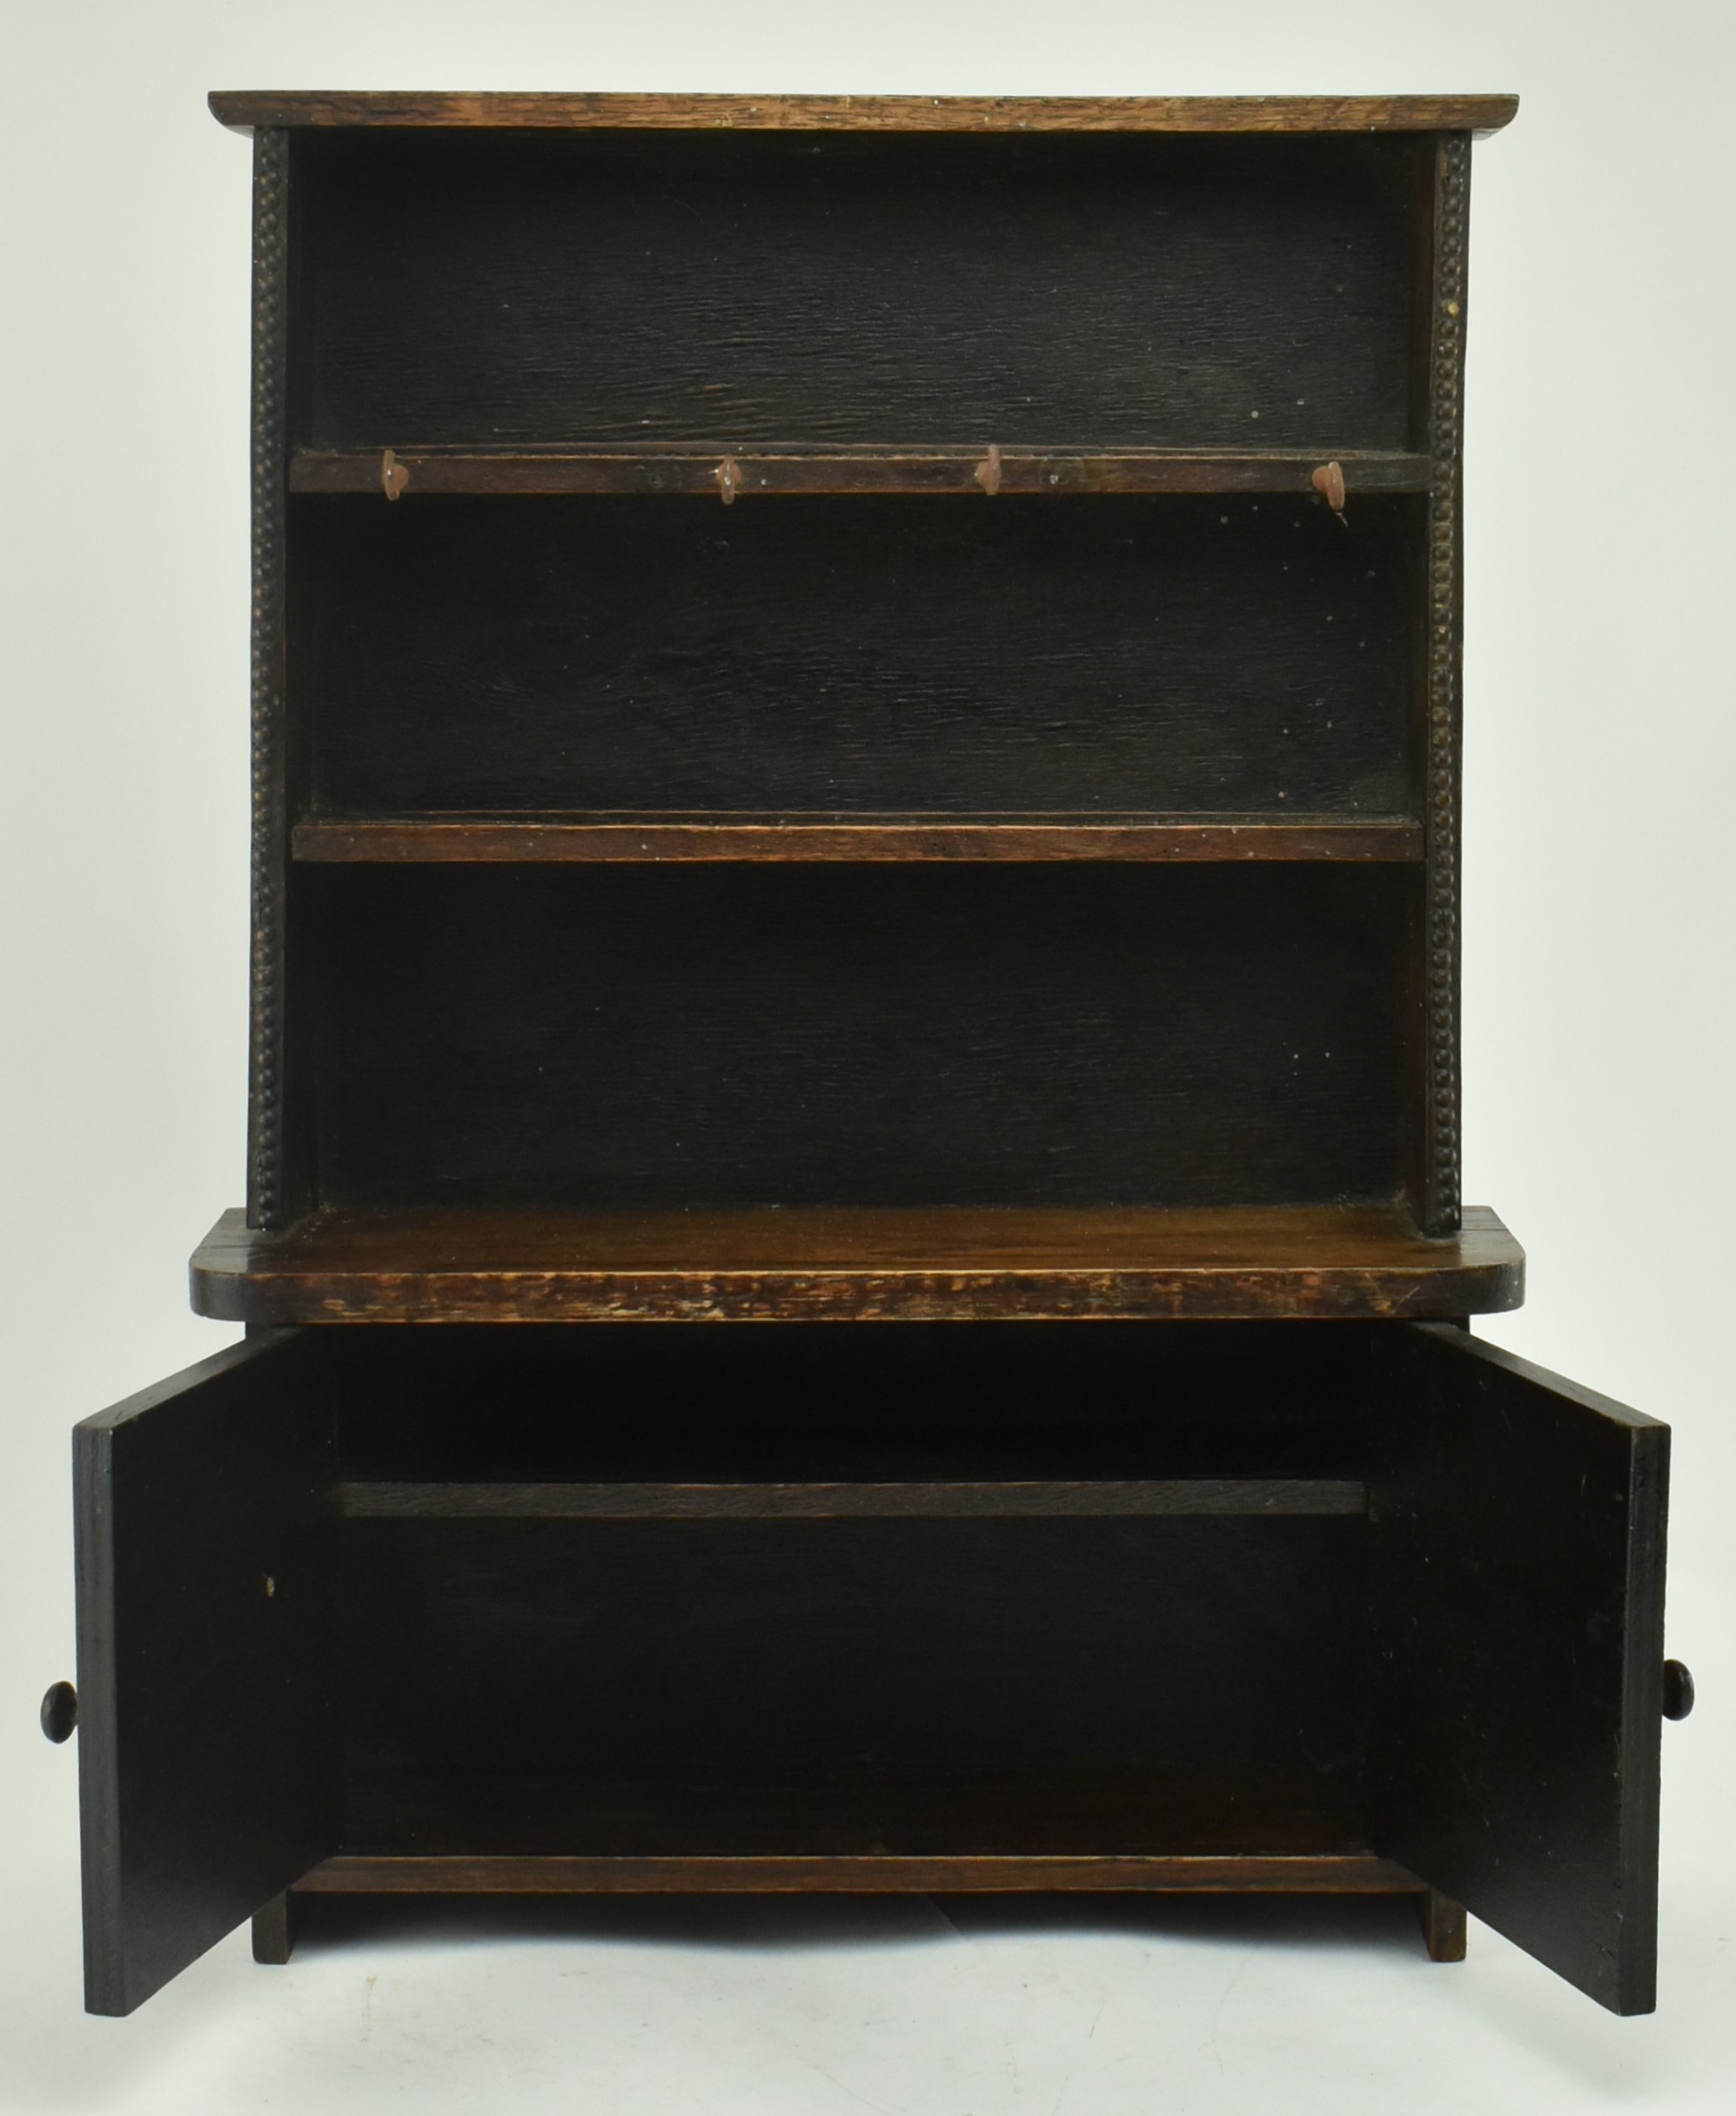 EARLY 20TH CENTURY MAHOGANY WELSH MINIATURE DRESSER - Image 5 of 6